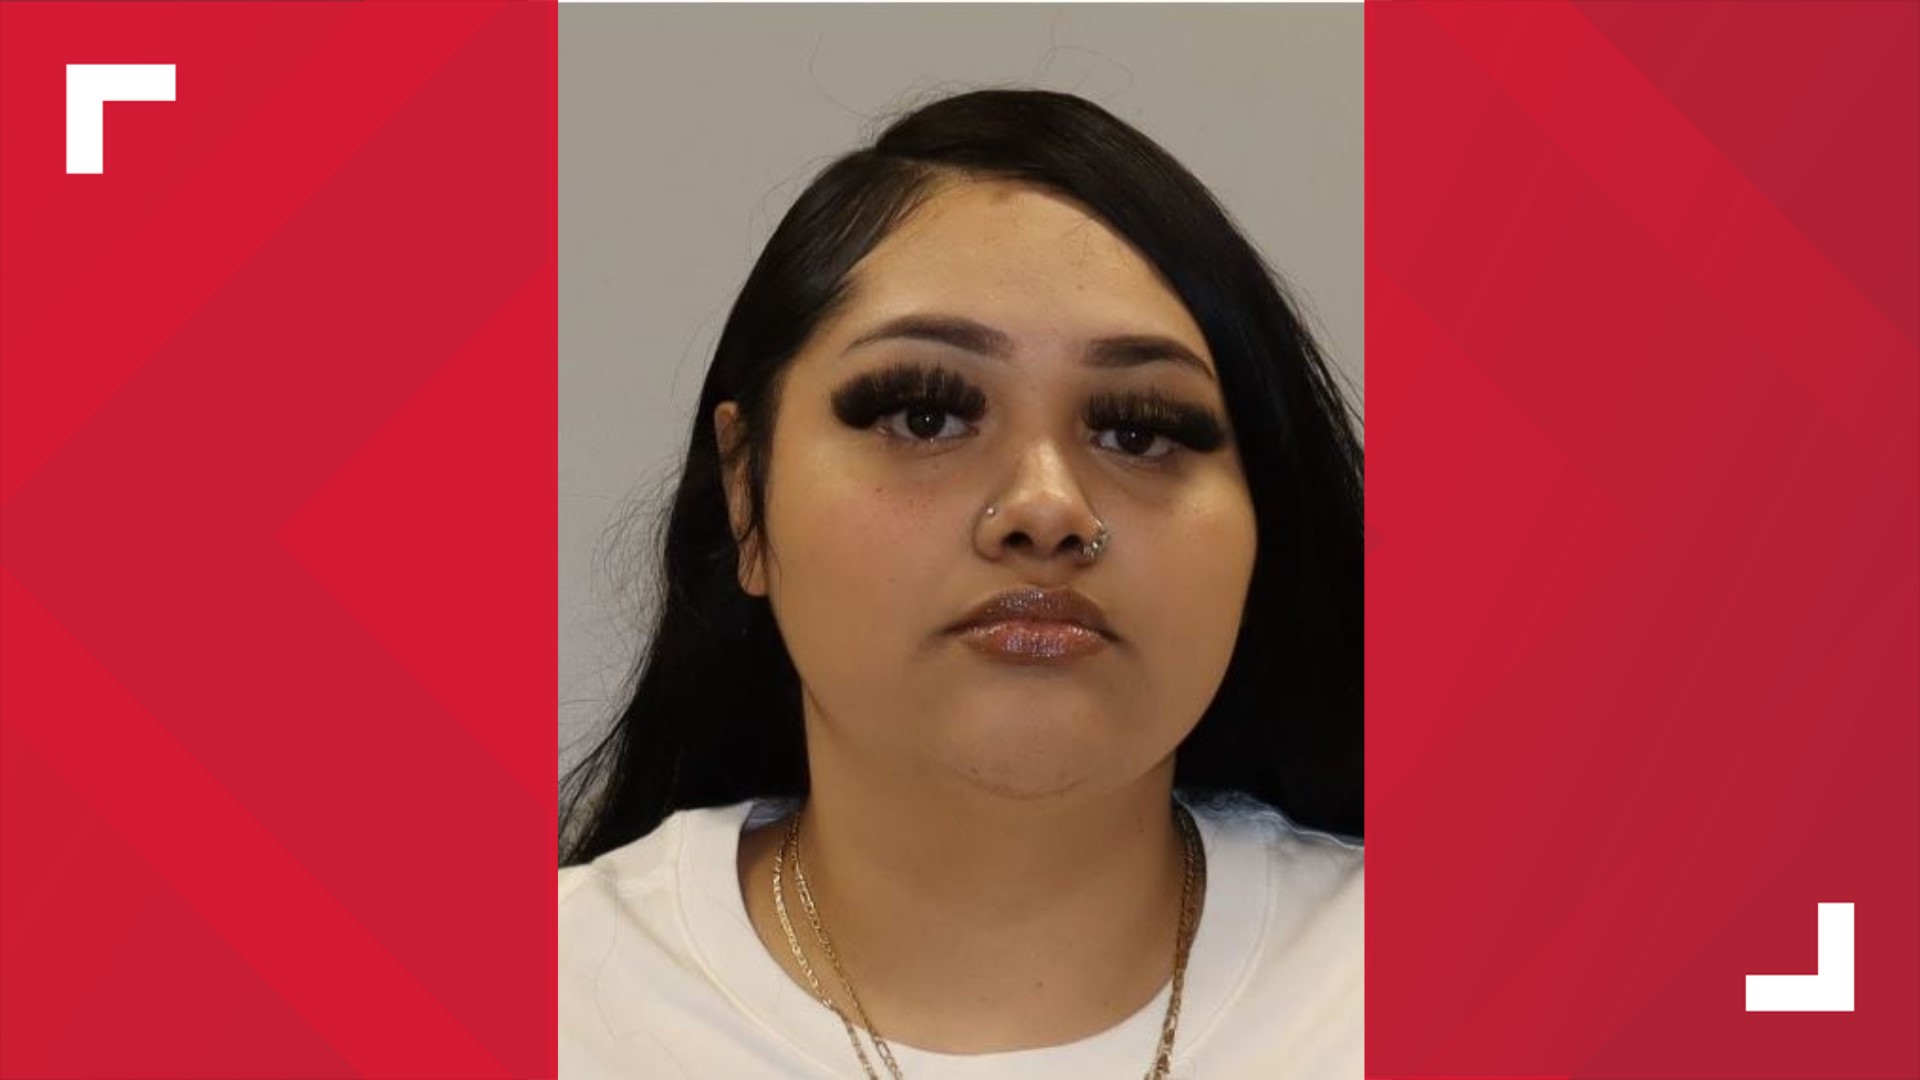 Ashley Guadalupe Rodriguez-Hernandez was found to have a BAC over the legal limit at the time of the crash. Police said she was headed south on US 131 northbound.